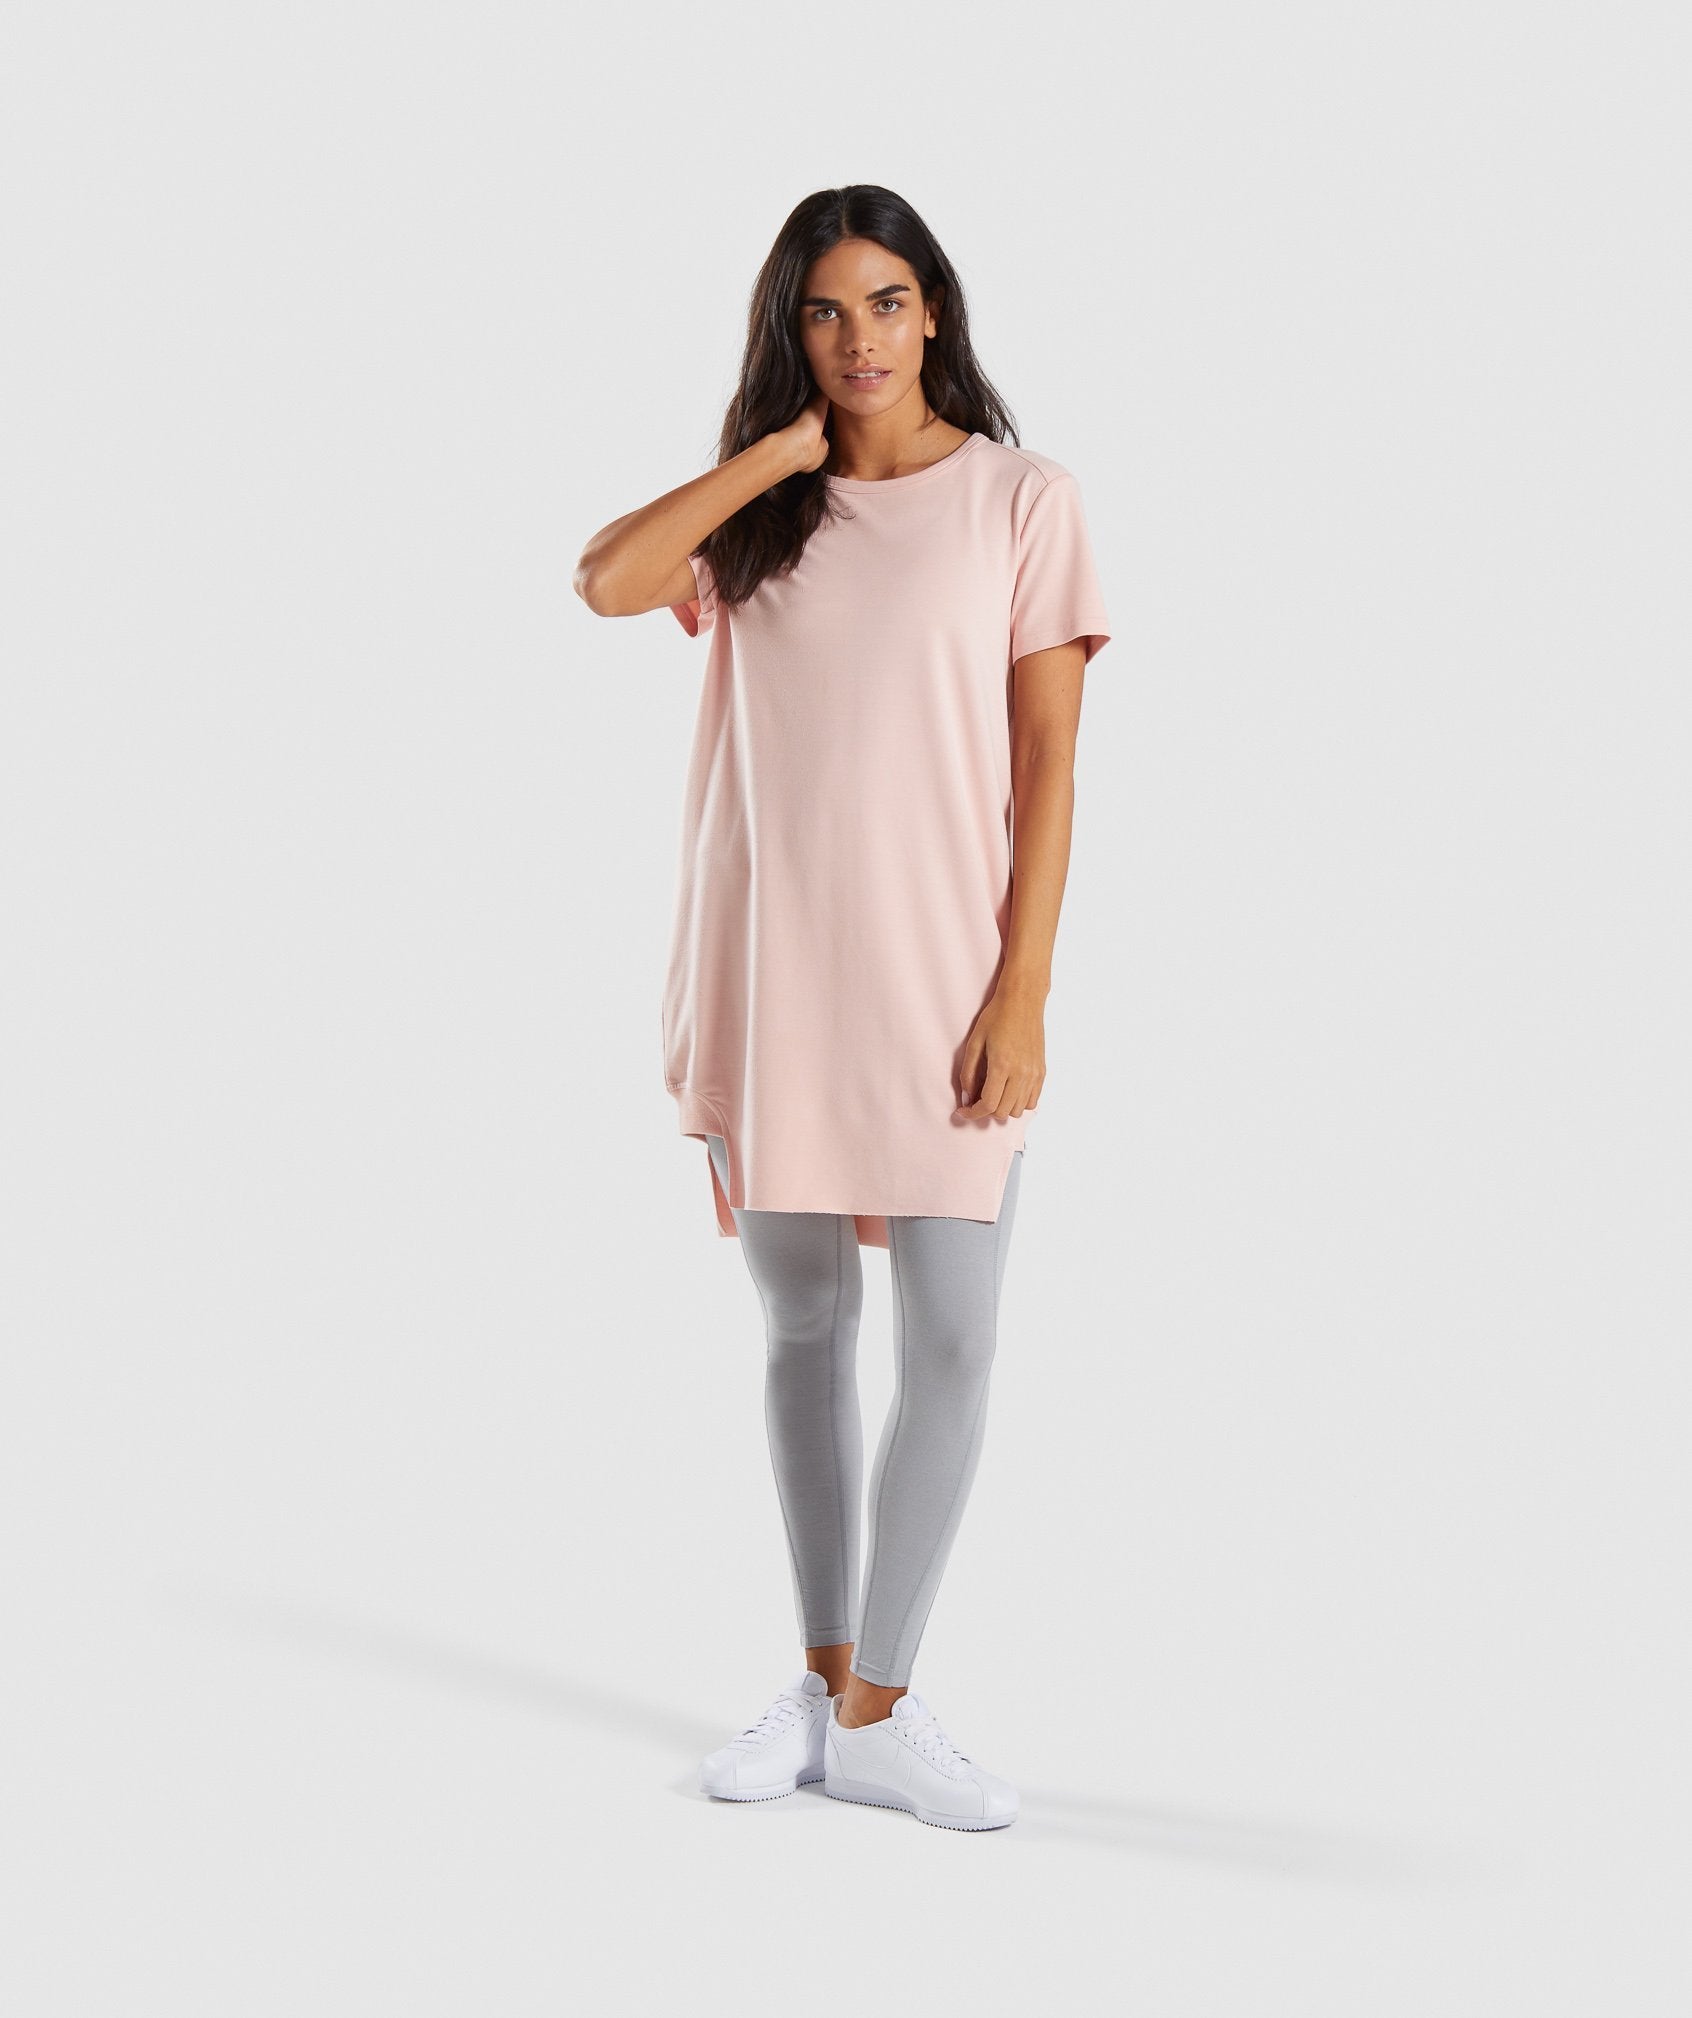 Slounge Crescent T-Shirt Dress in Blush Nude - view 4